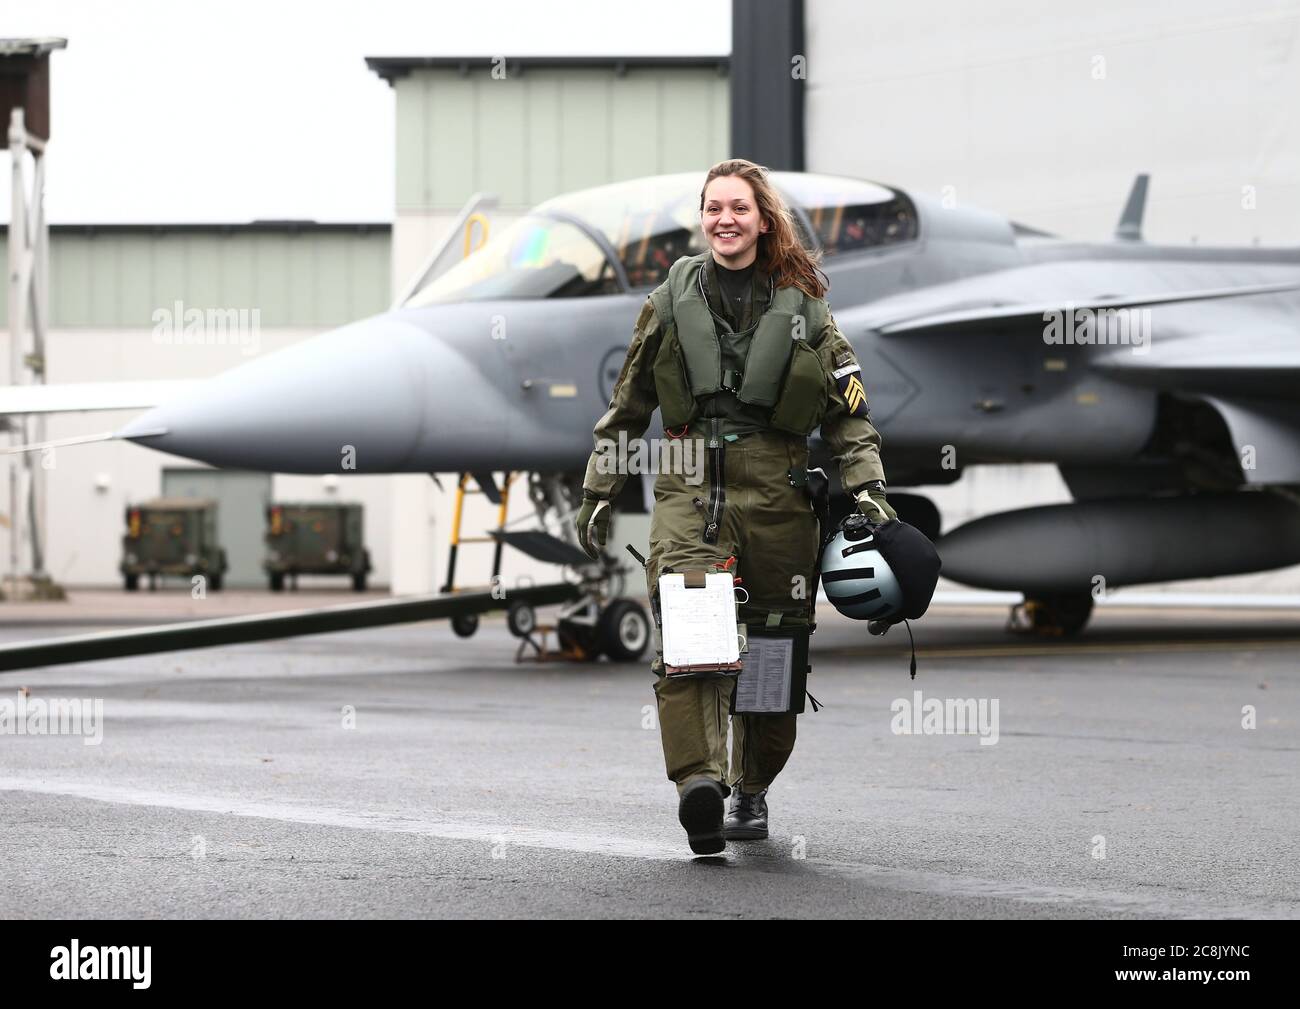 Malmslätt, Sweden 2017-01-26Graduation ceremony, Swedish Air Force, at the Flight School at Malmen Airport, where 23 students were awarded the respective badge for pilot and meteorologist. For the first time in 25 years, a female cadet, Lovisa Sandelin (in the picture), becomes a fighter pilot and gets her pilot wings after completing basic training. Photo Jeppe Gustafsson Stock Photo